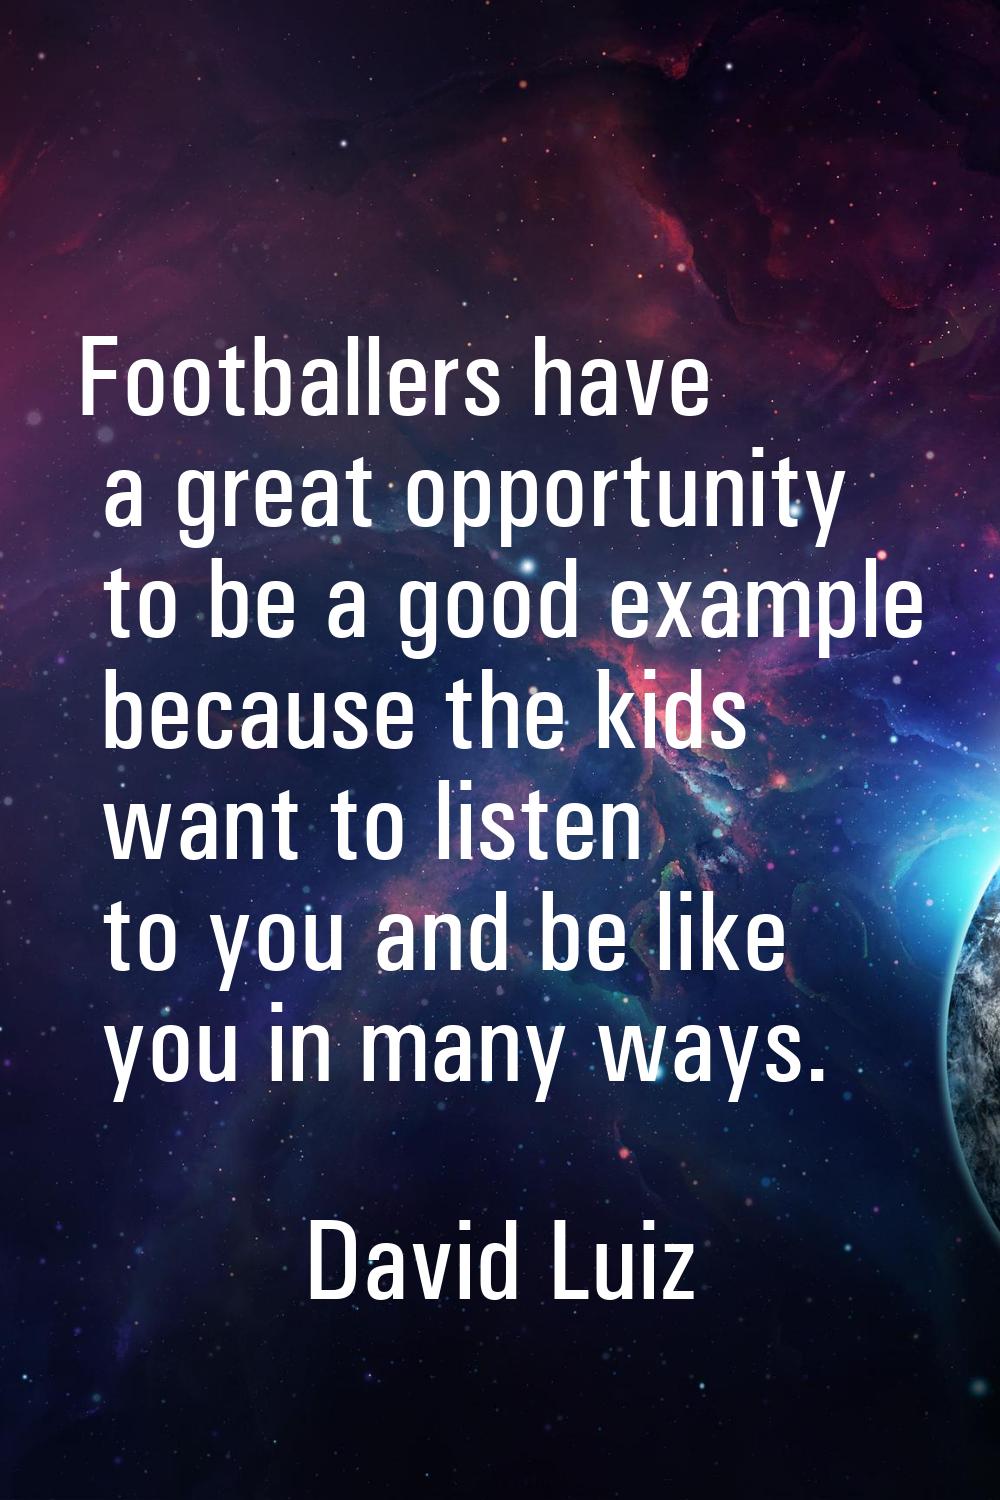 Footballers have a great opportunity to be a good example because the kids want to listen to you an